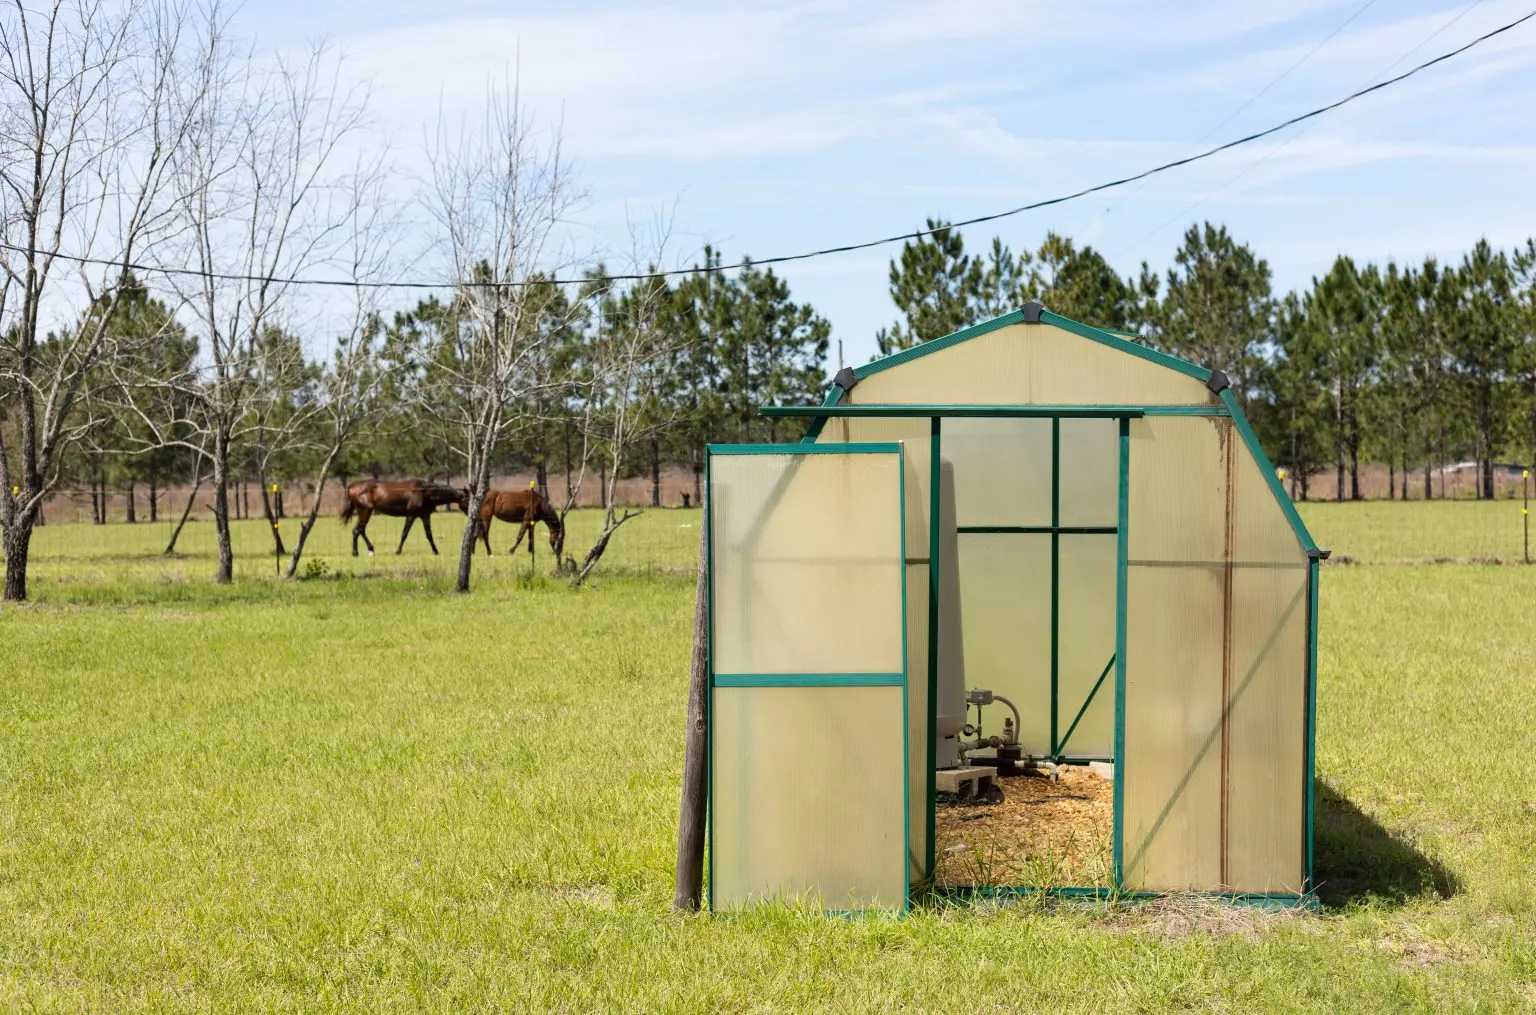 a small greenhouse with a door open stands in a flat field. There are two horses in the background eating grass. Inside the shed is machinery.